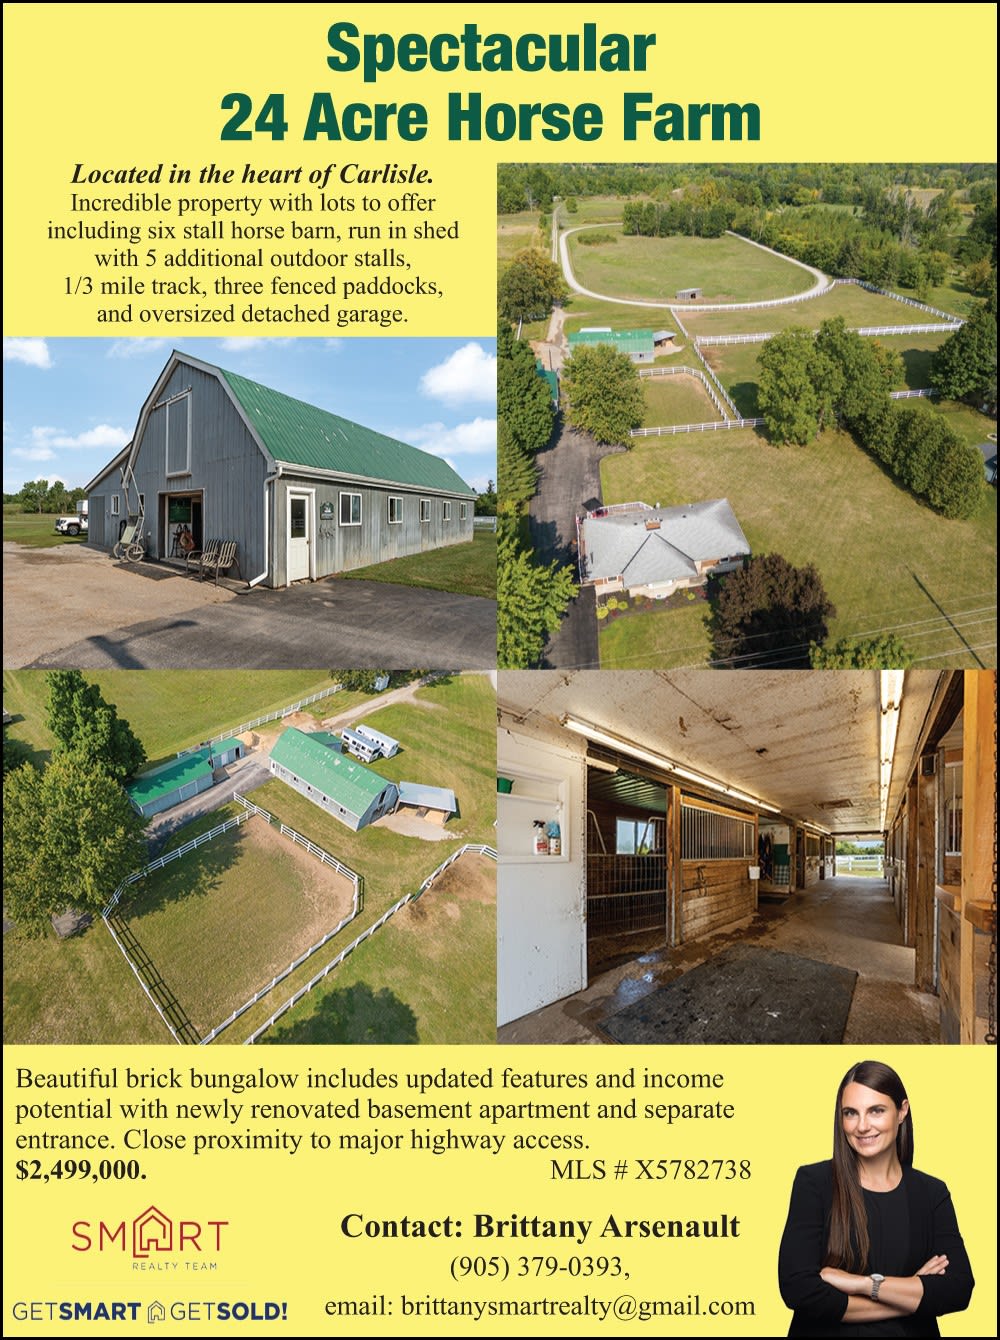 Brittany Arsenault - Smart Realty 